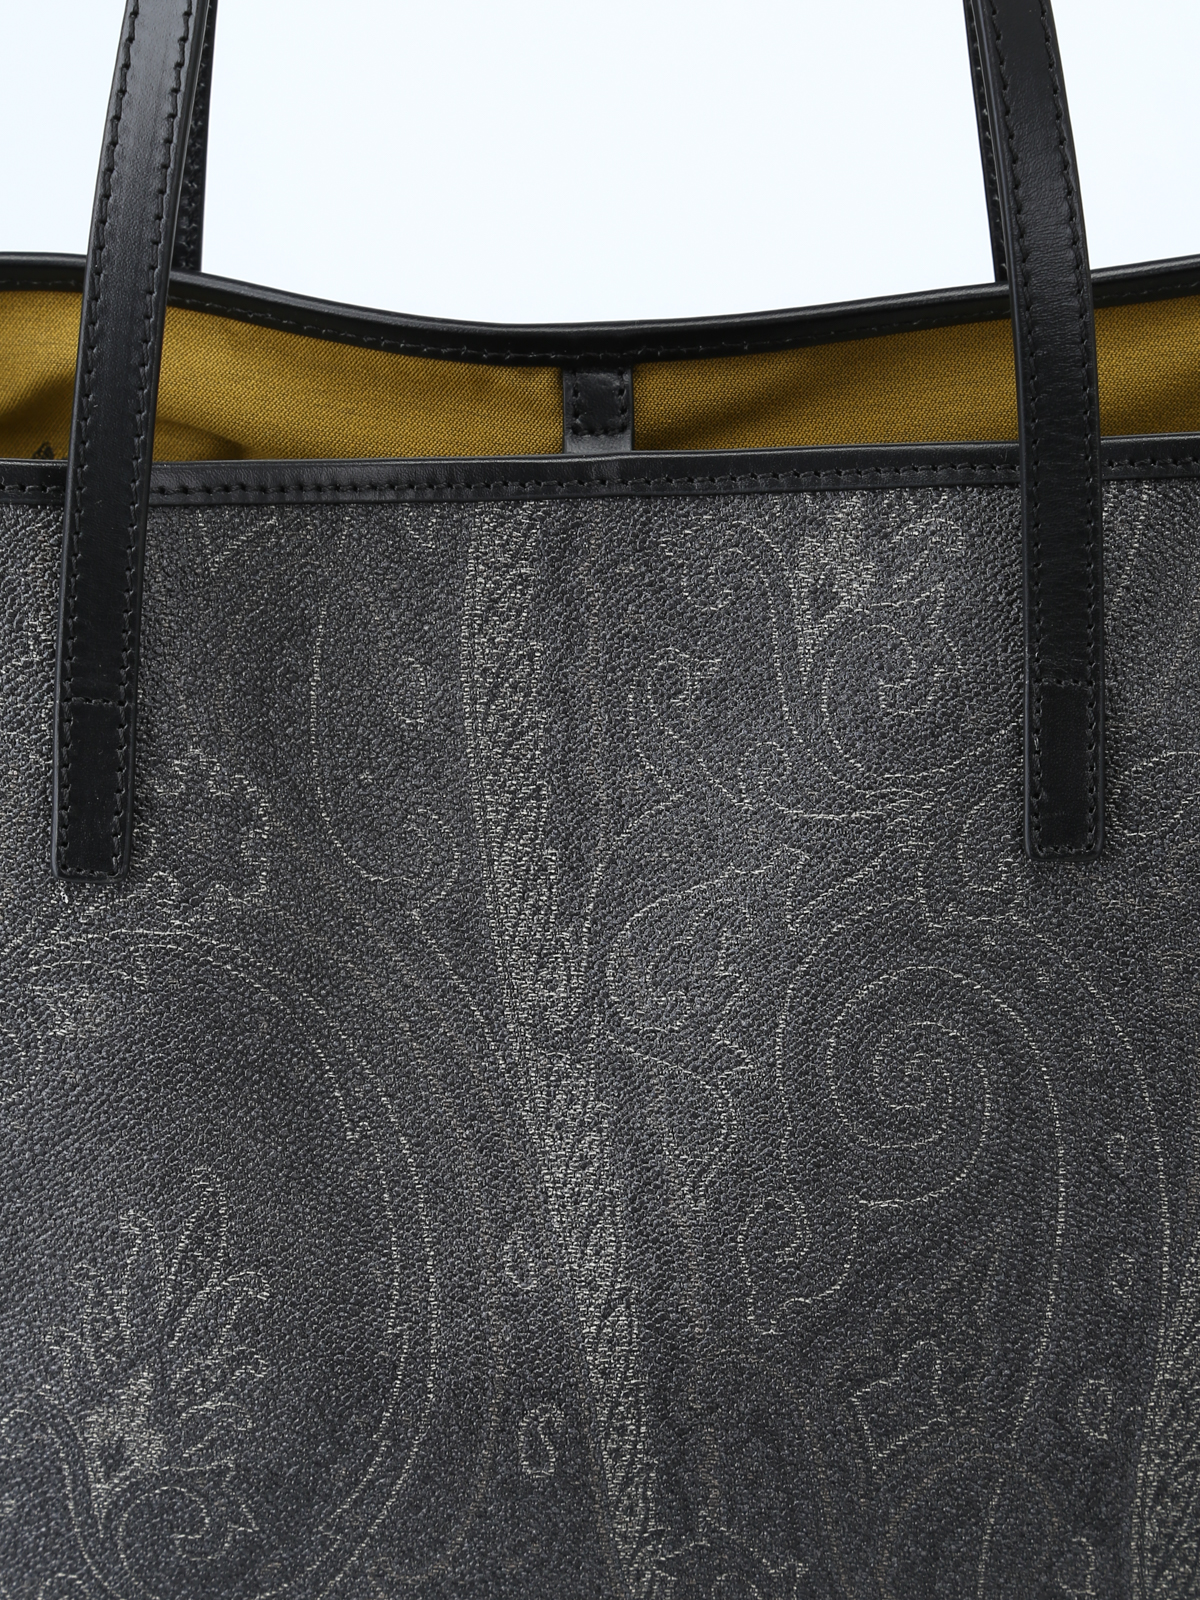 Totes bags Etro - Paisley east west black tote - 0B37480101 